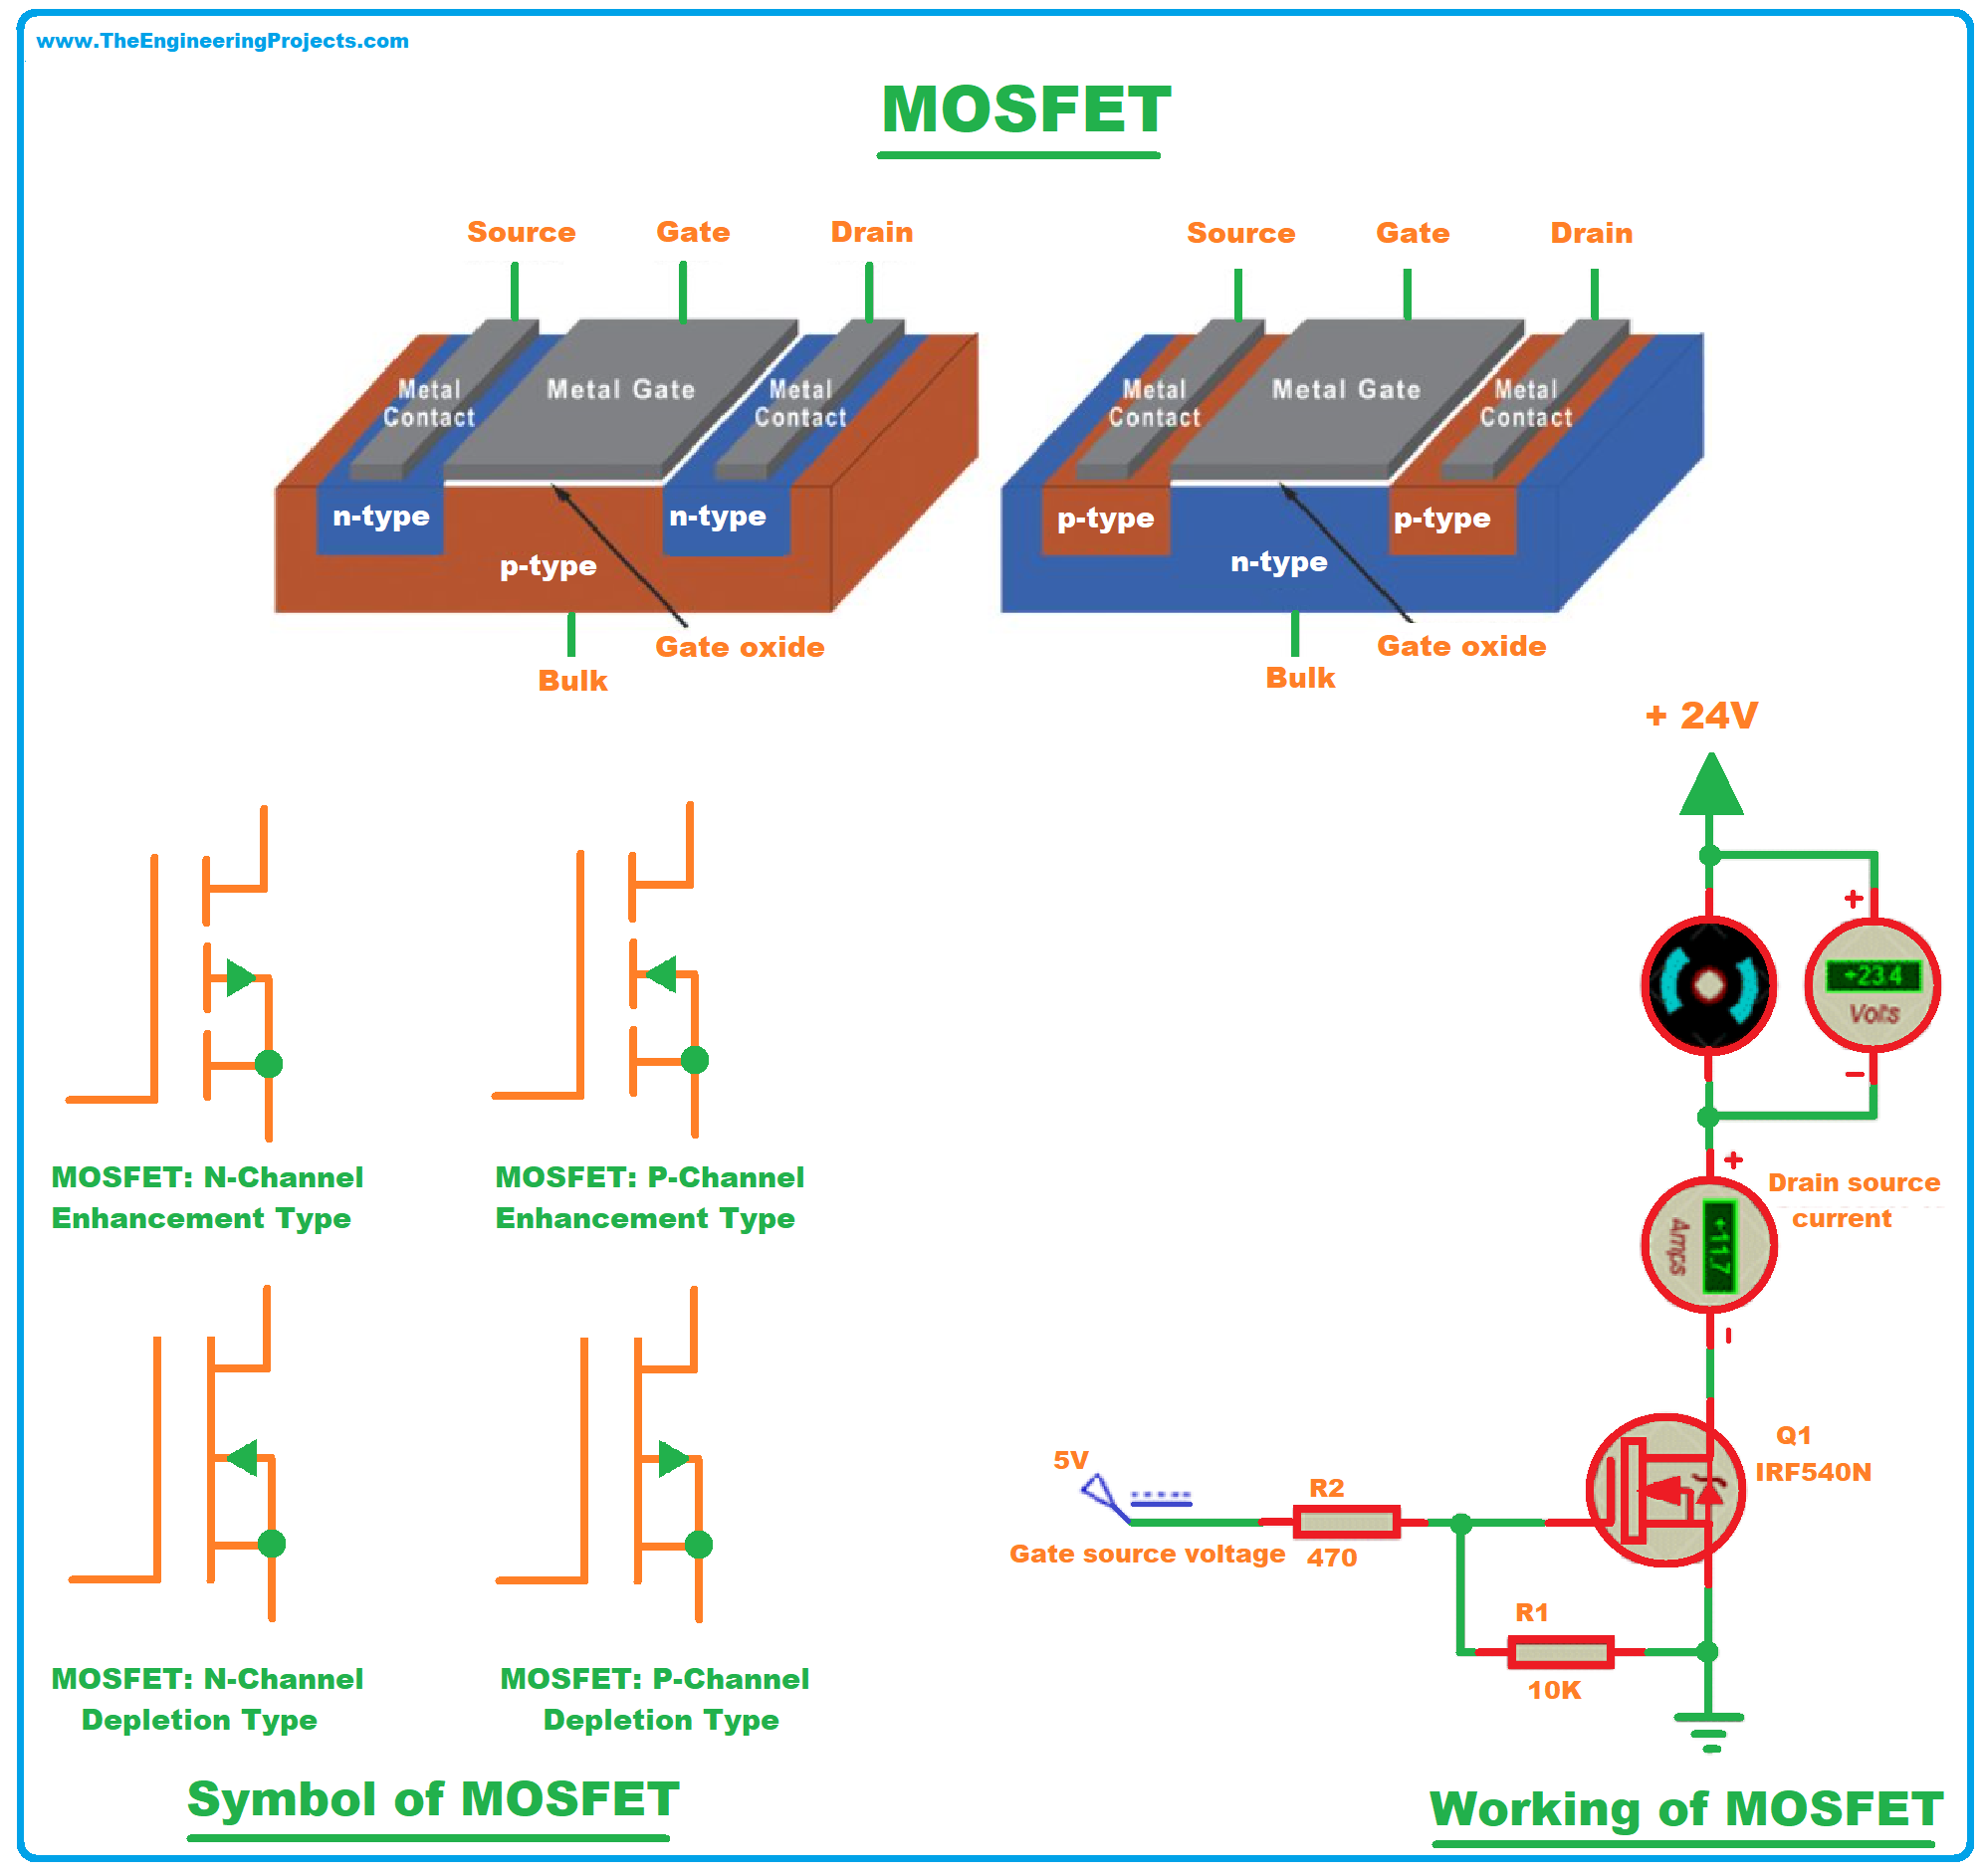 MOSFET, What is MOSFET, MOSFET definition, MOSFET history, MOSFET types, MOSFET characteristics, MOSFET applications, working of MOSFET, construction of MOSFET